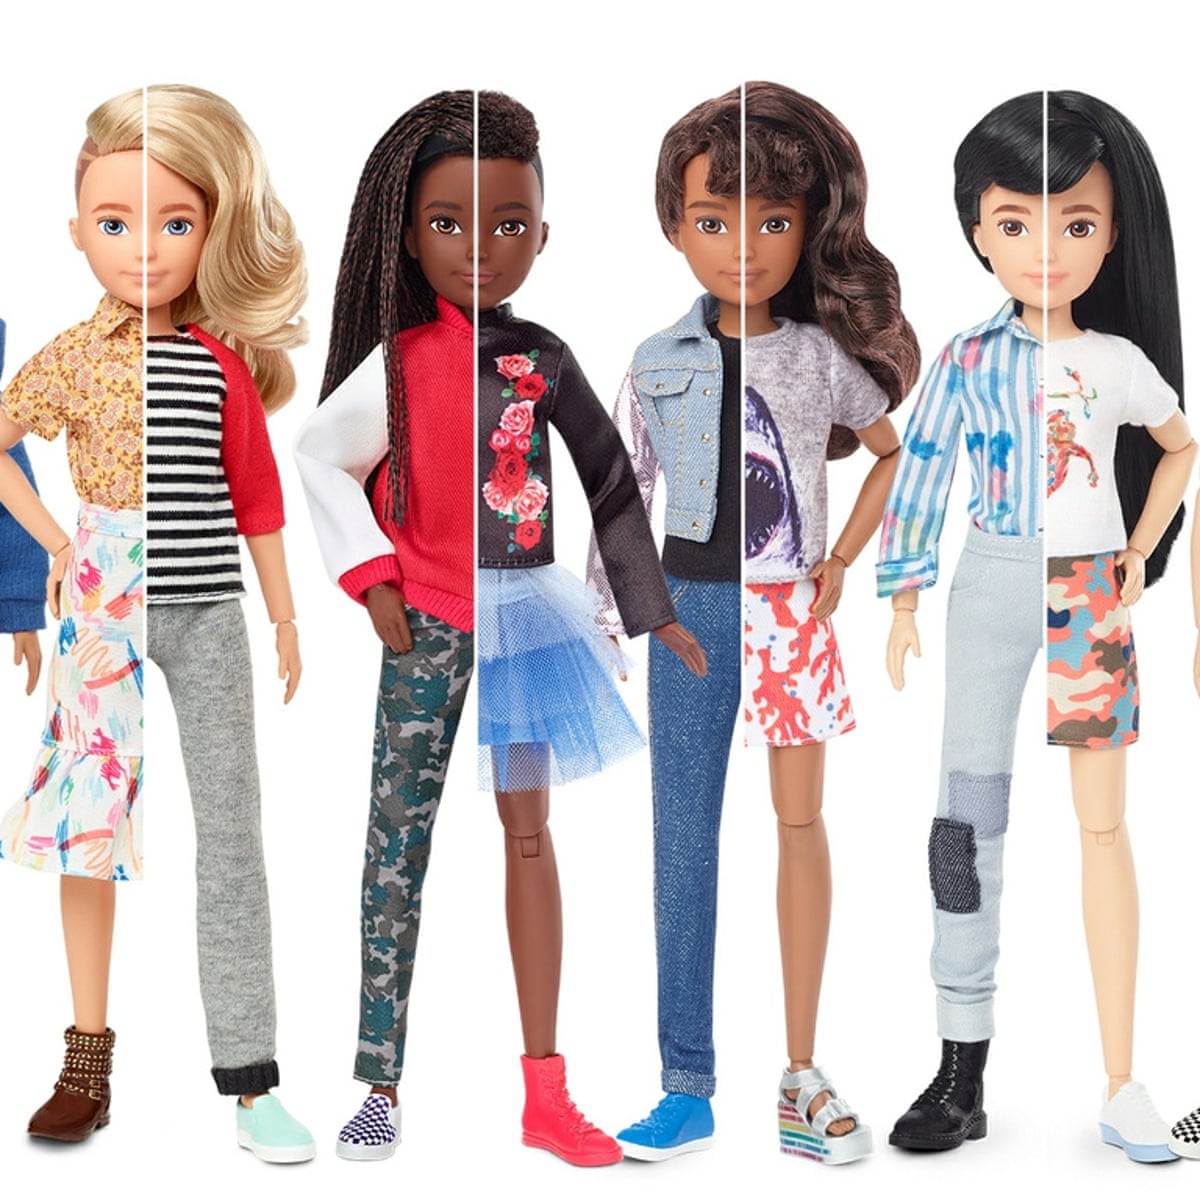 was time': maker of Barbie launches of gender-neutral dolls | Toys | The Guardian